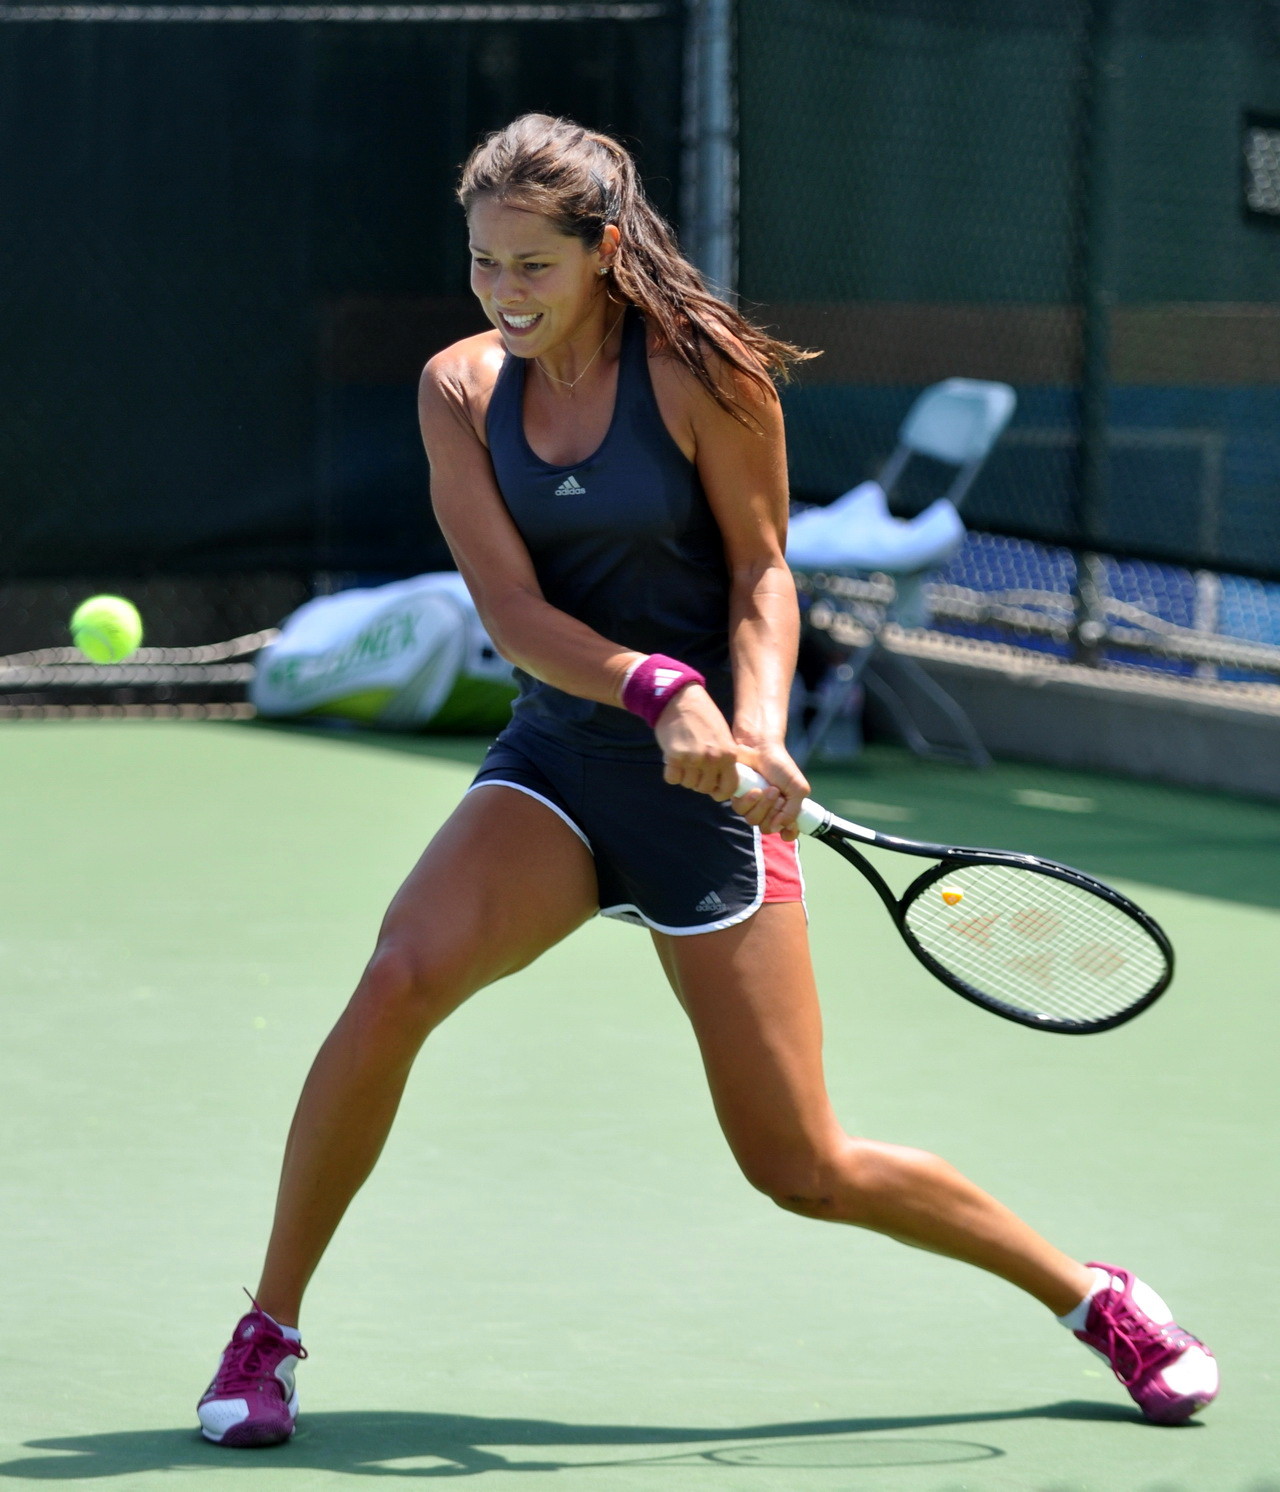 Ana Ivanovic leggy  shows pokies in sweaty workout gear practicing for Western   #75336590